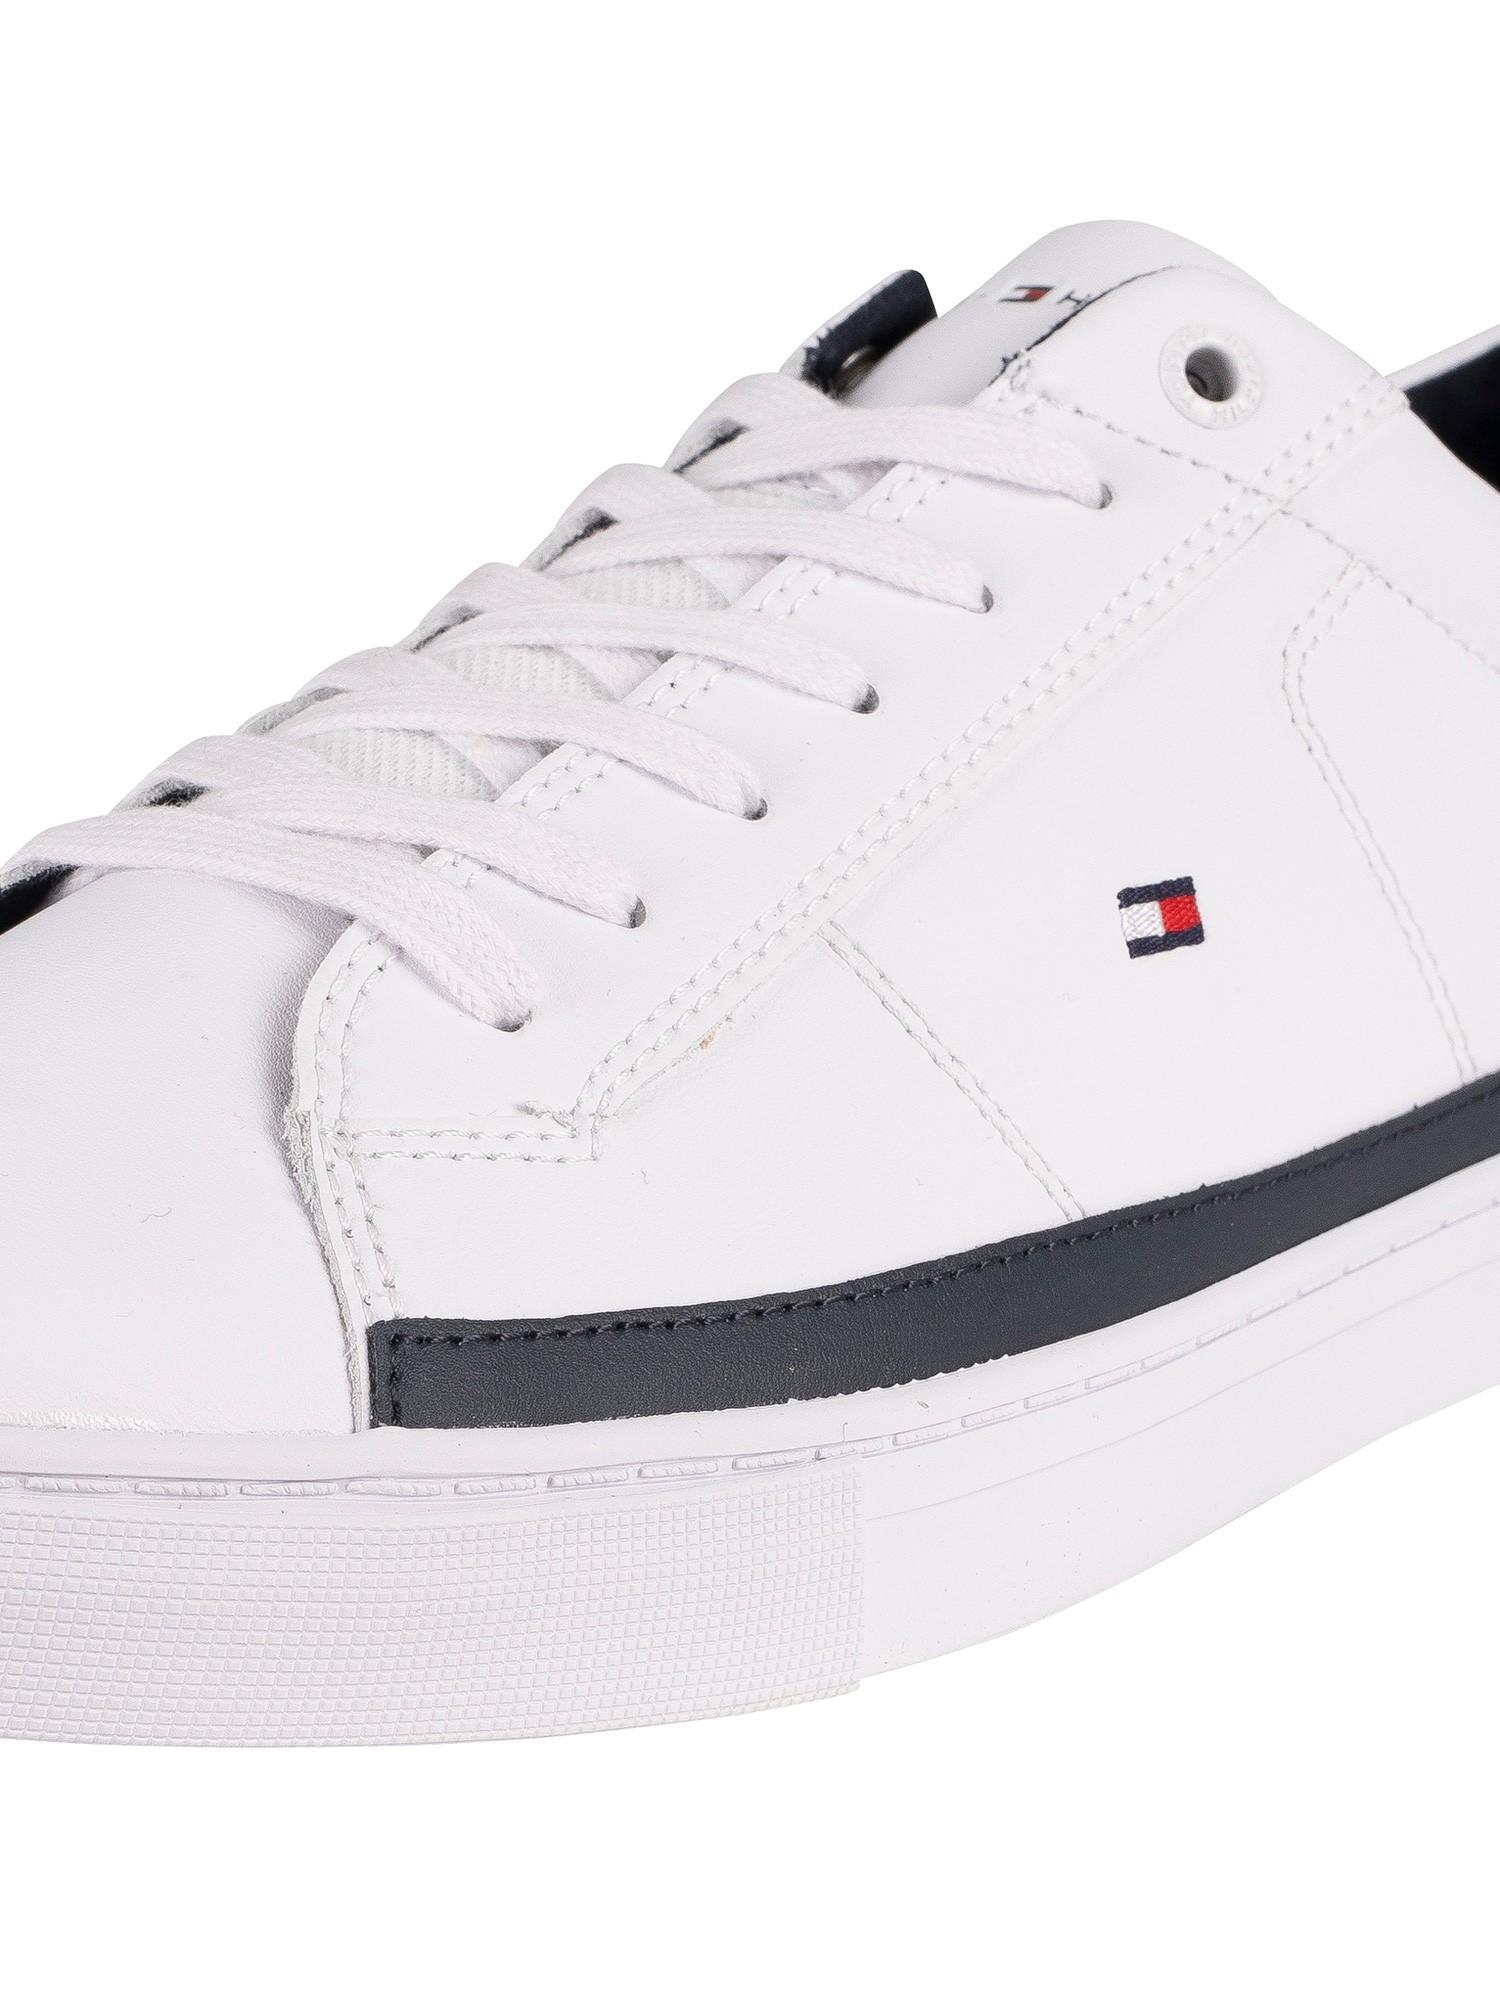 Tommy Hilfiger Essential Leather Trainers in White for Men - Lyst